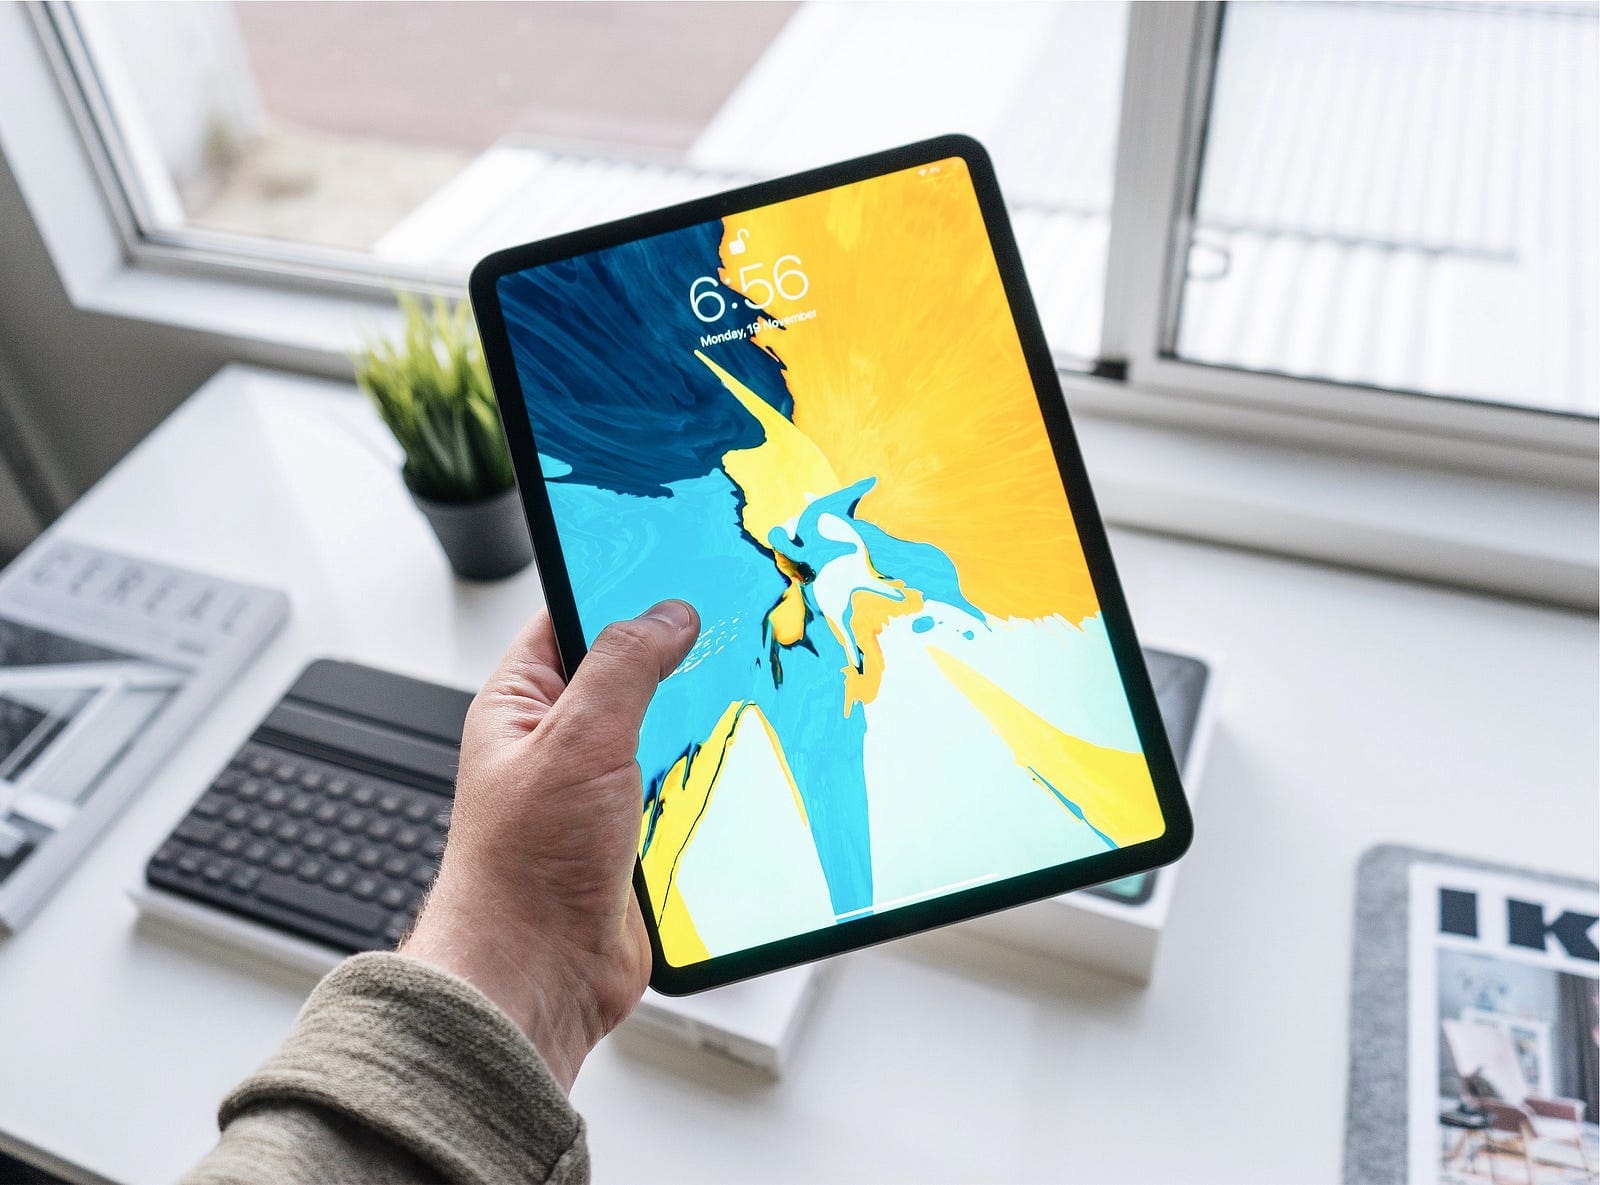 Why I Won’t Replace My MacBook With an iPad Pro (Although I Really Want to)